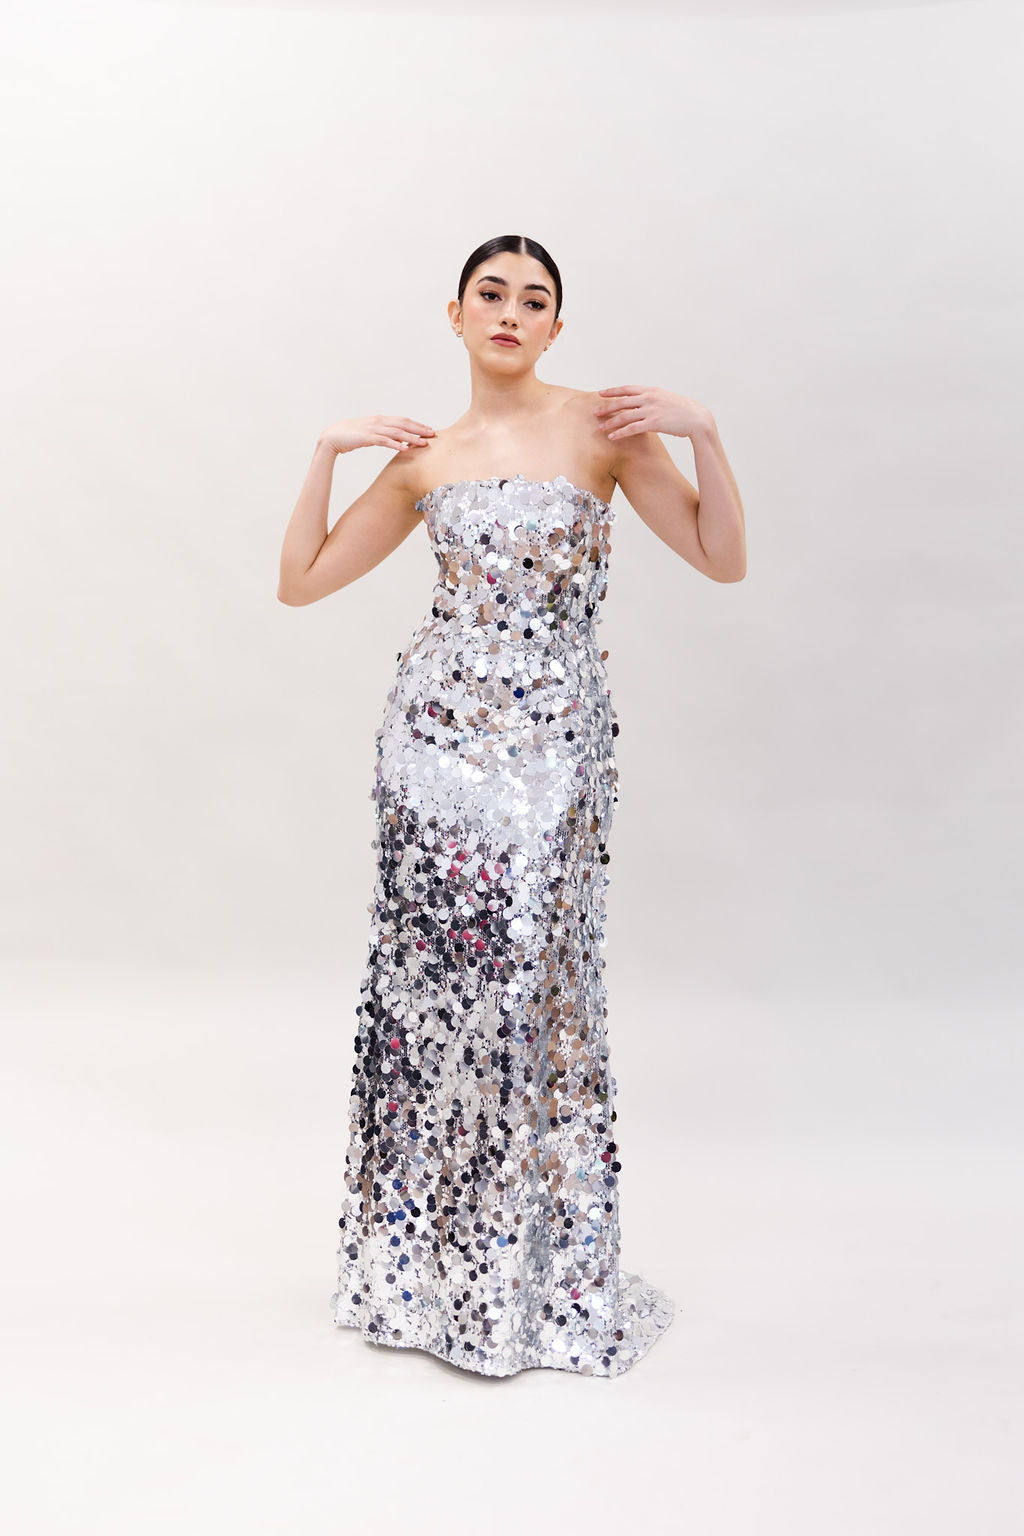 THE SILVER SEQUIN GOWN